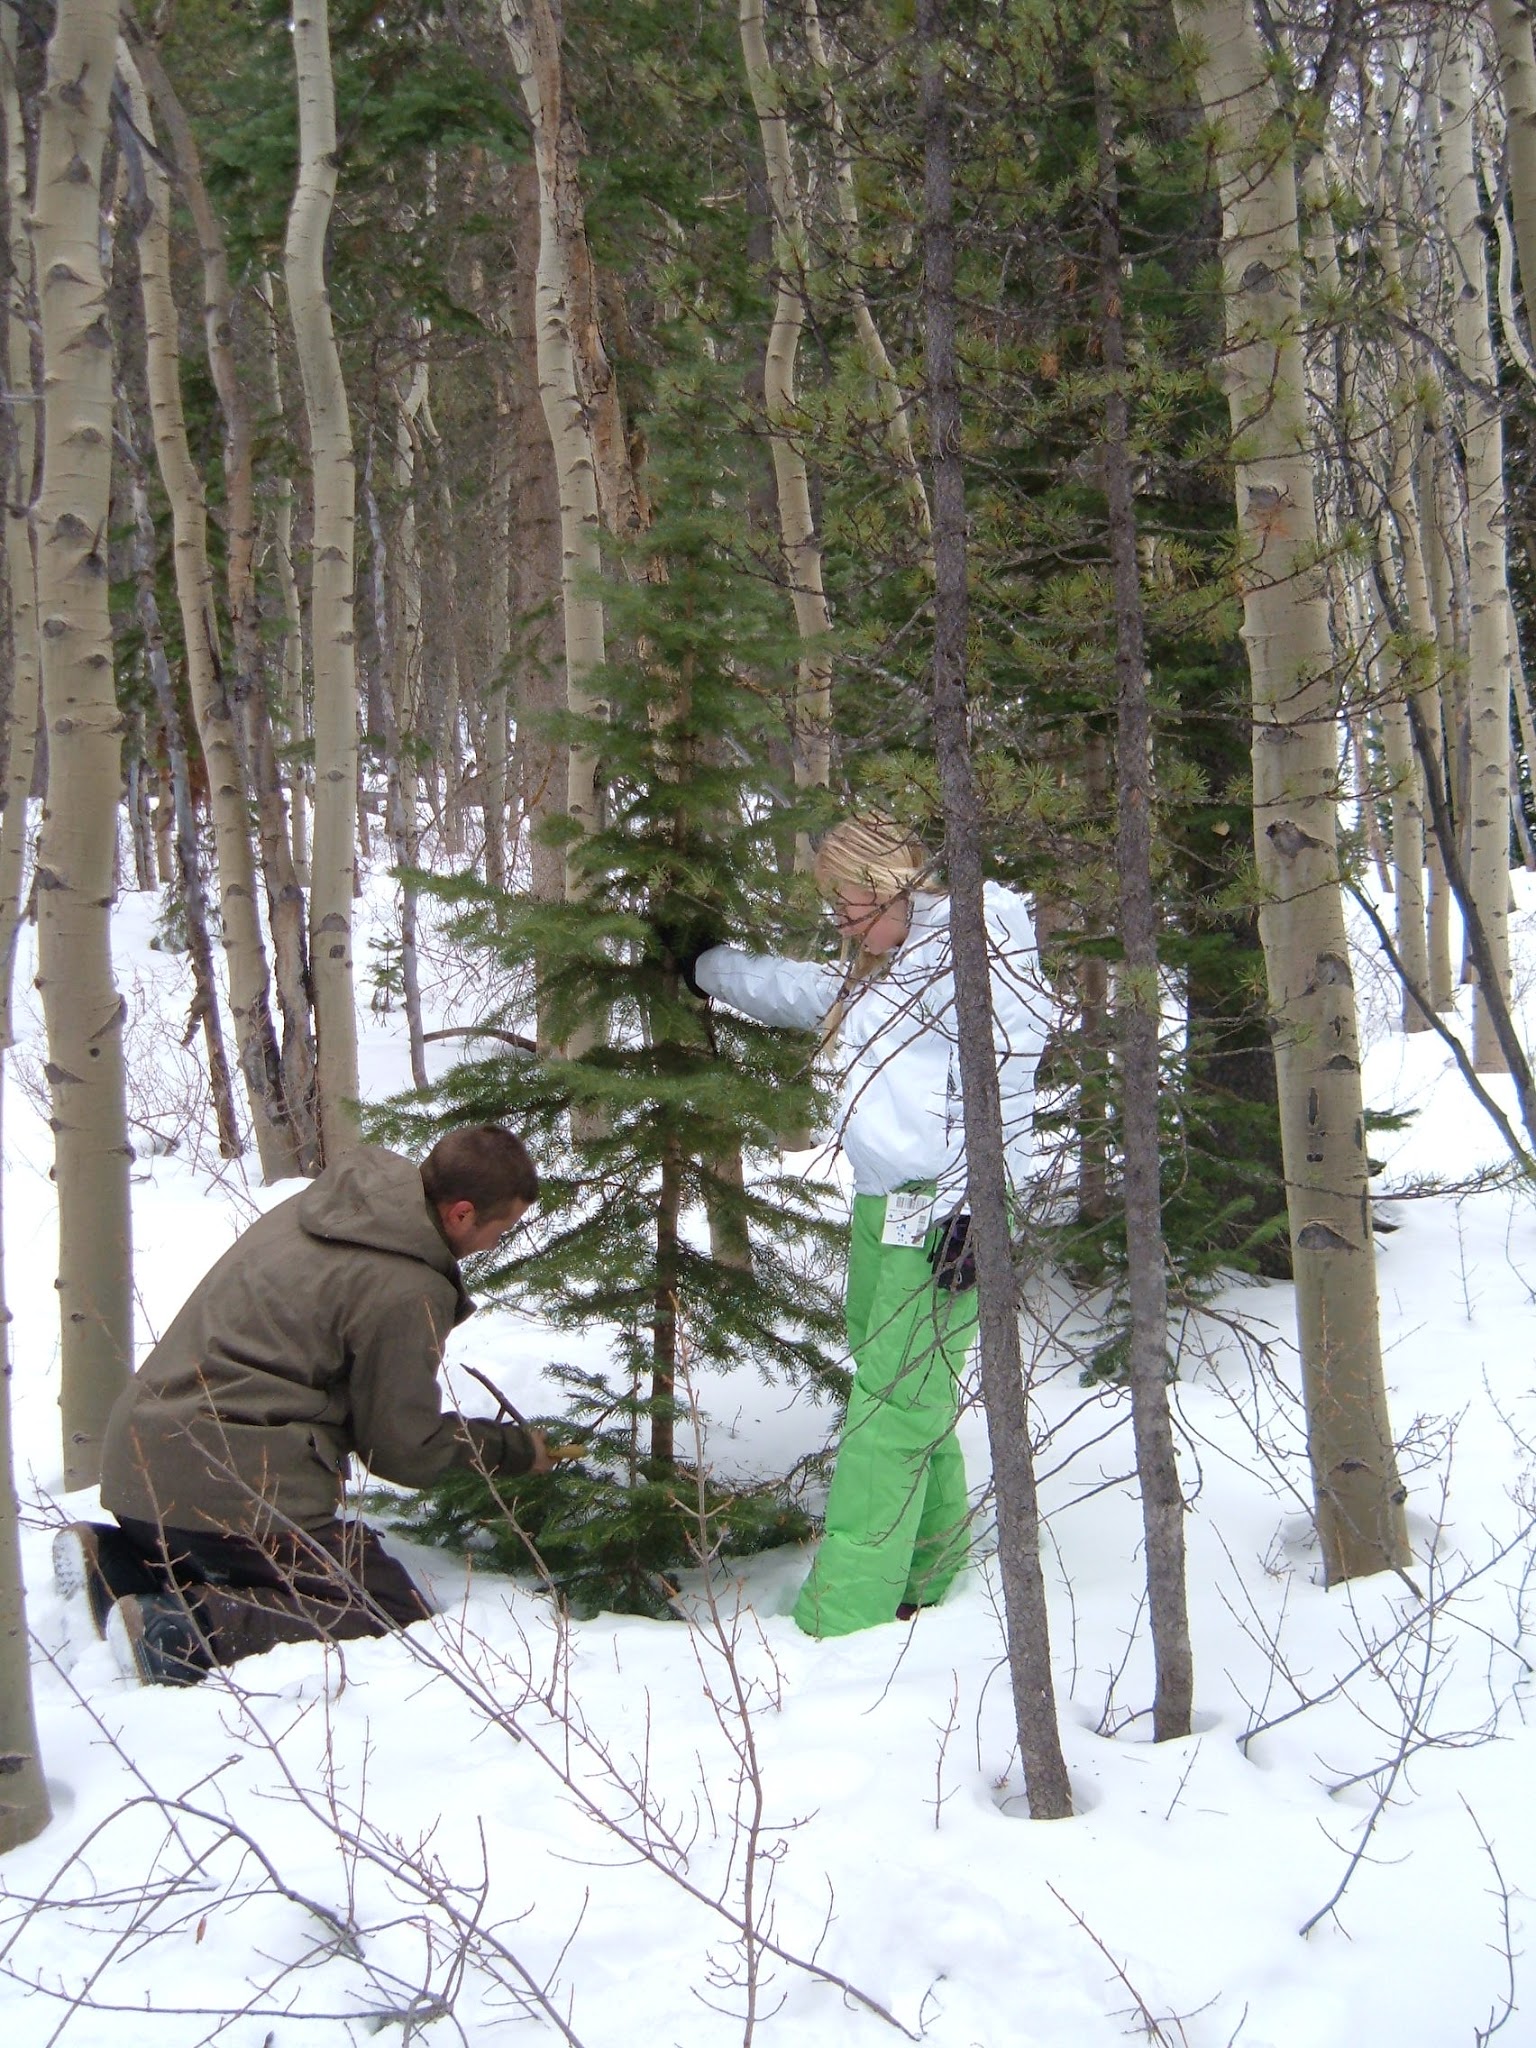 Two people cutting down a Christmas tree in the forest.